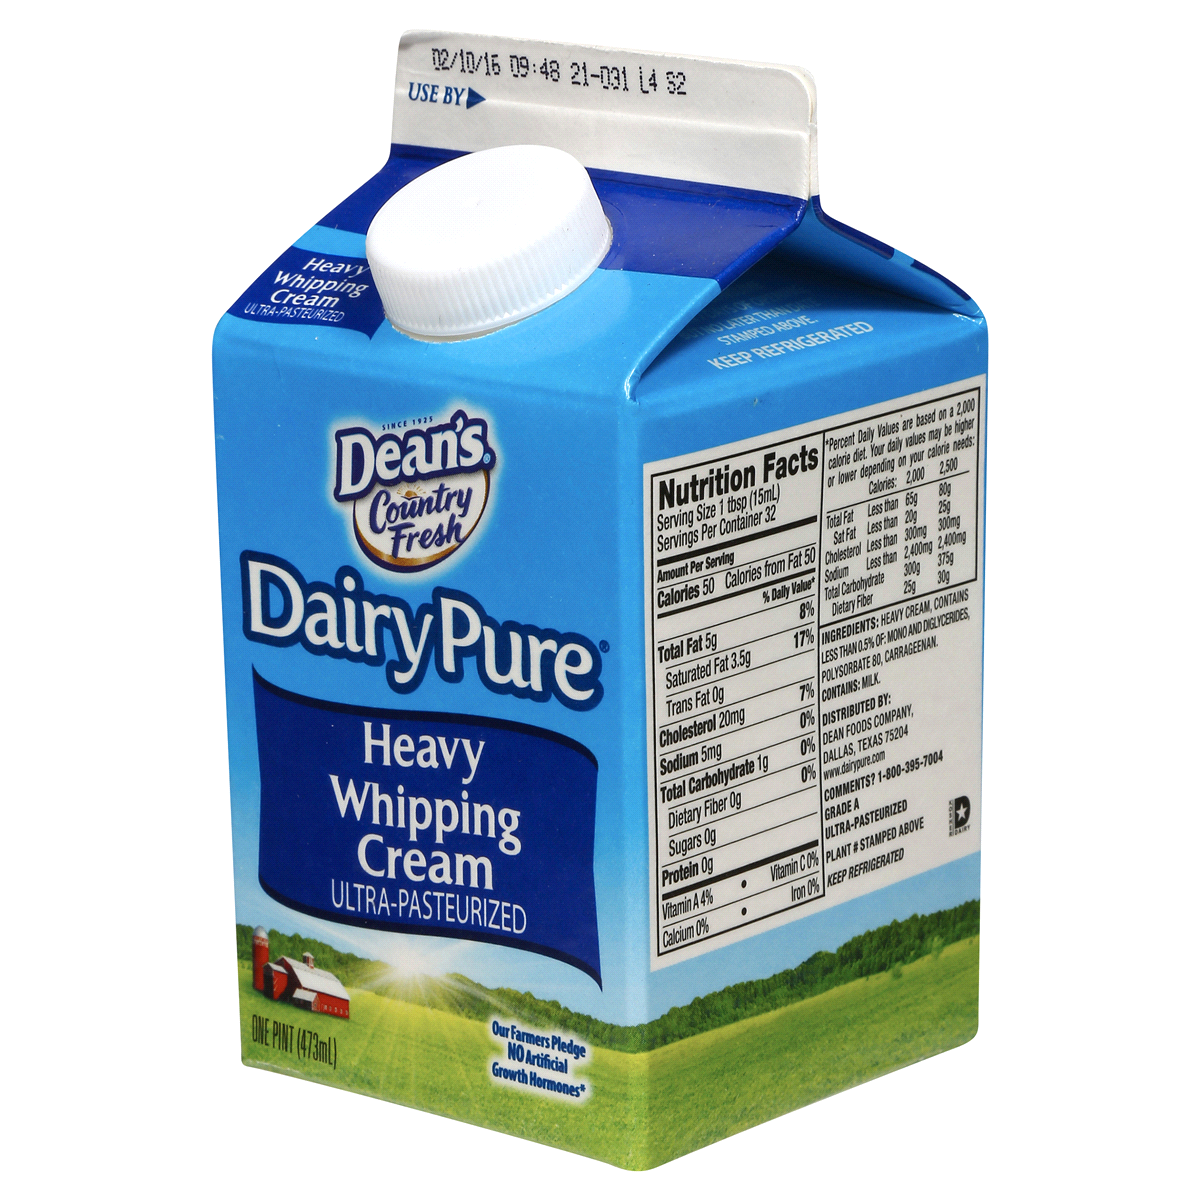 slide 6 of 6, Dairy Pure Heavy Whipping Cream, 1 pint